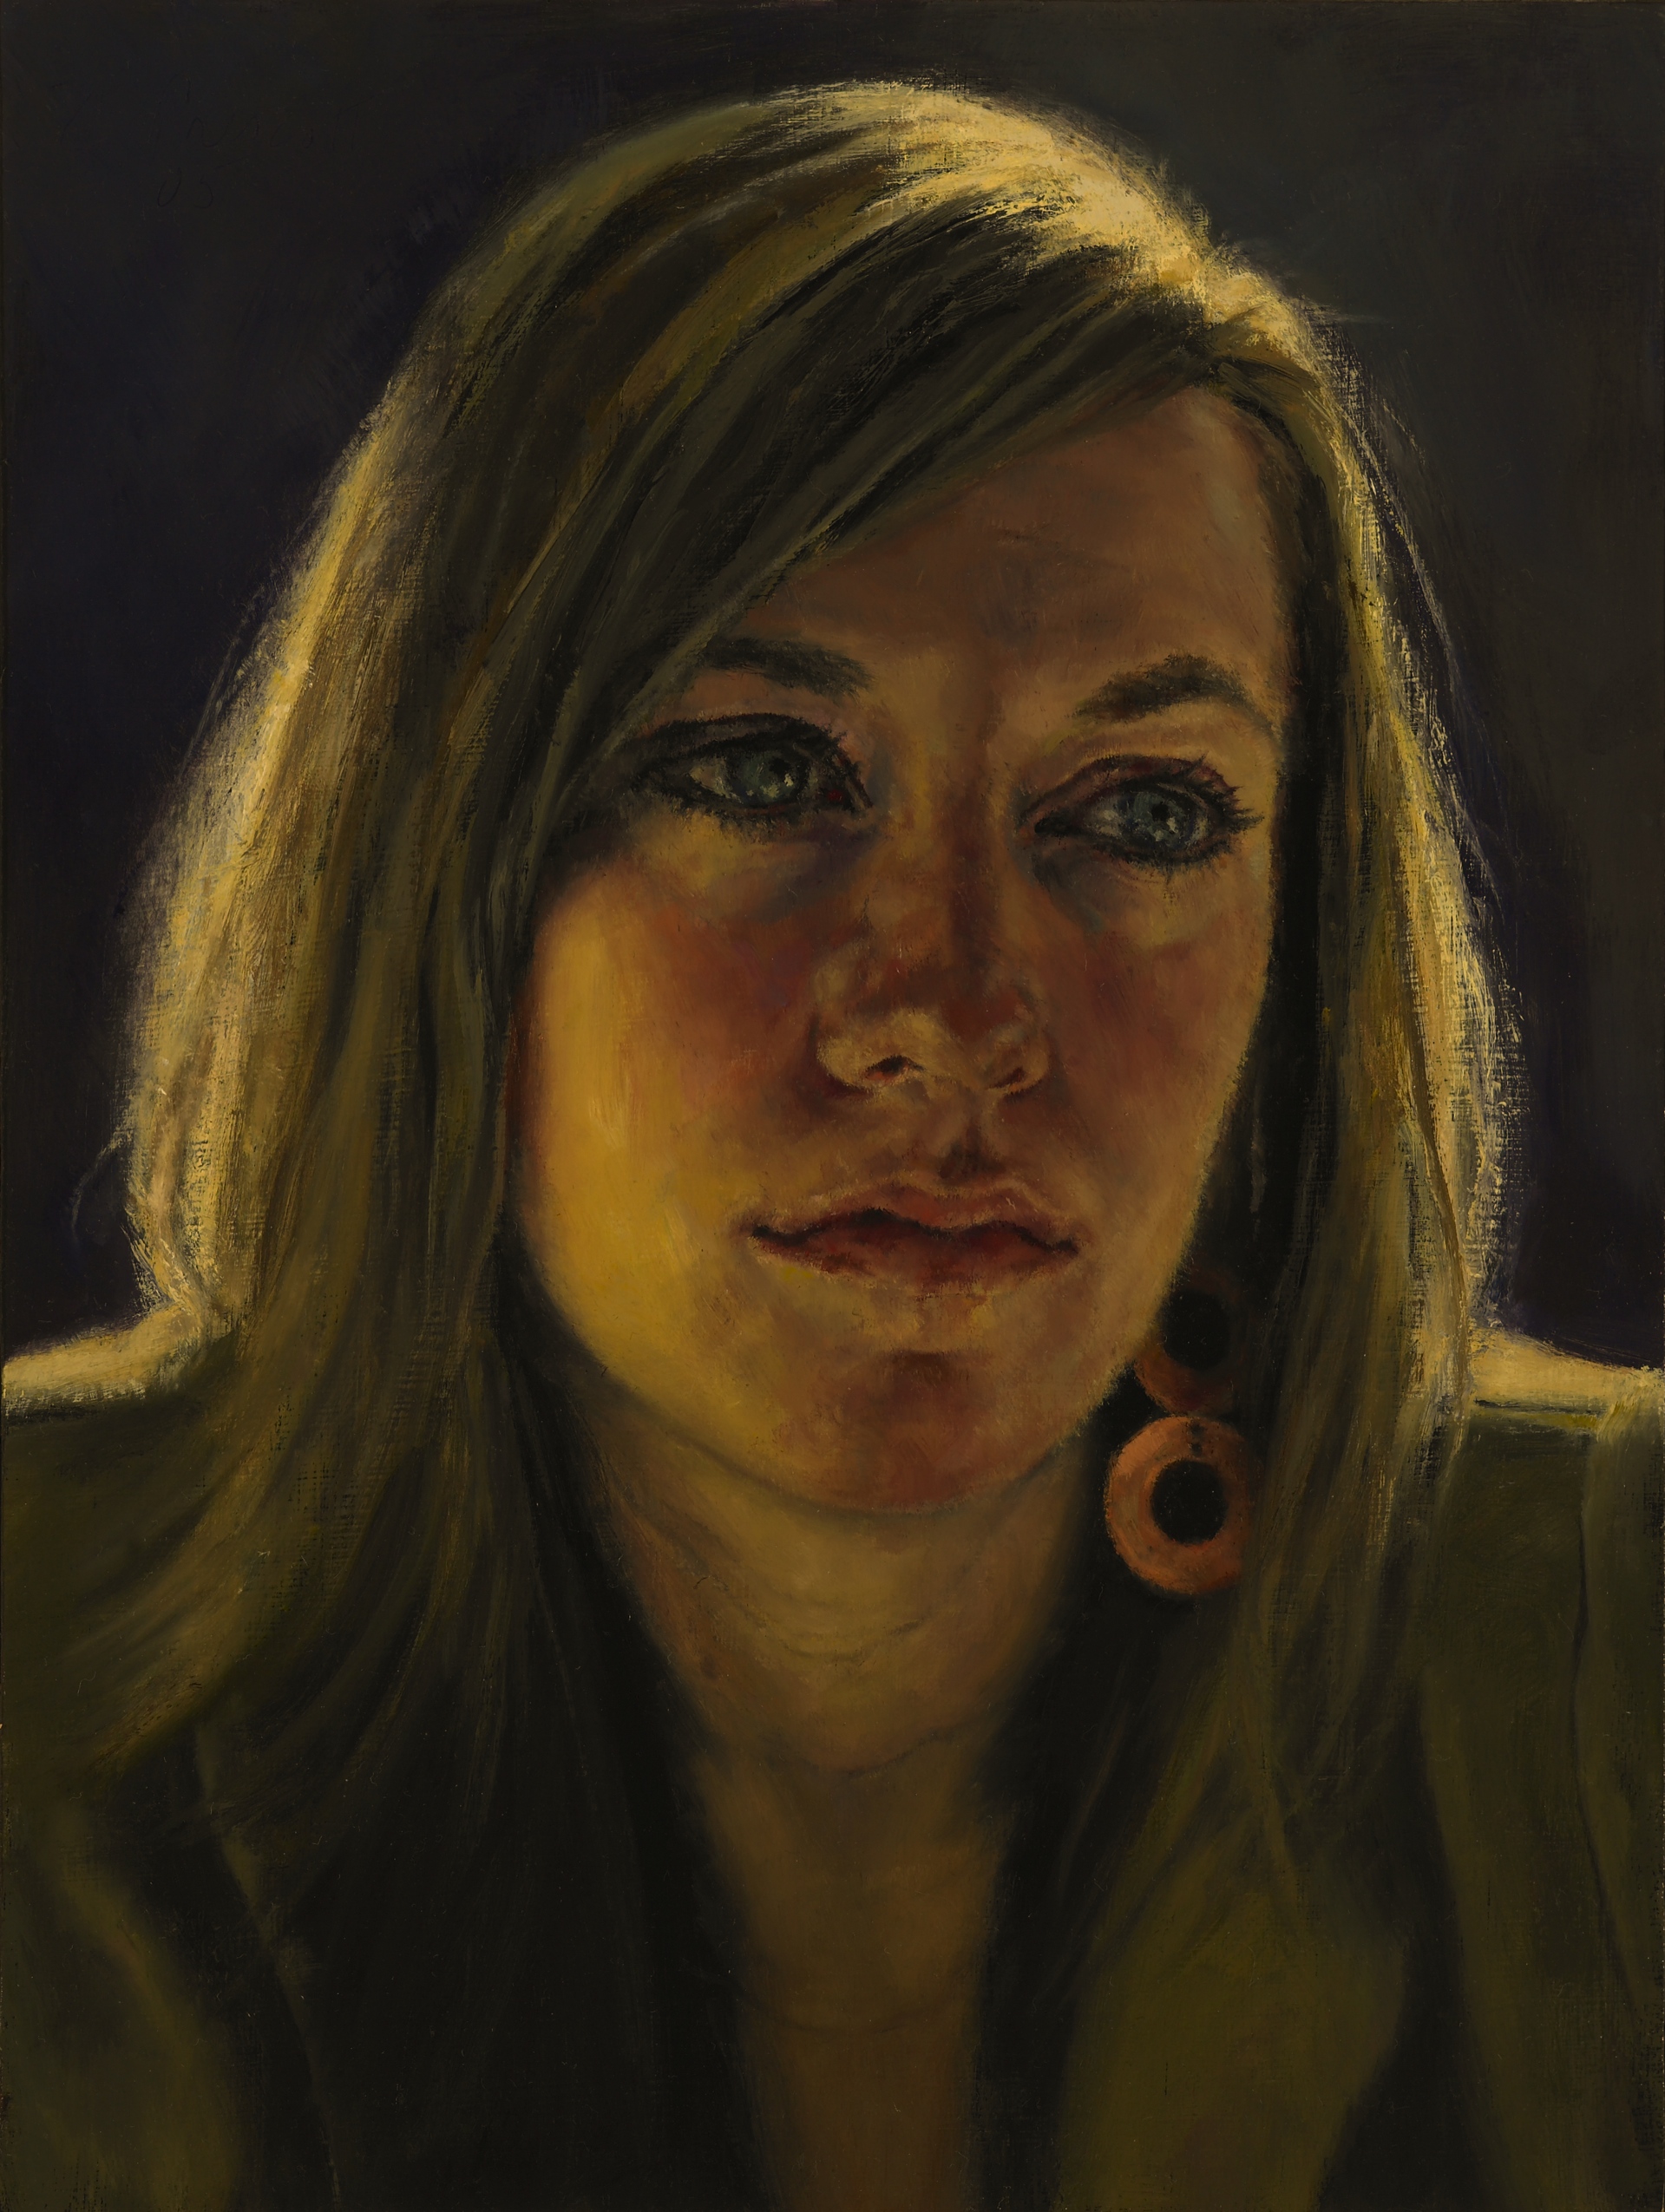   Grace , Oil on Wood Panel, 2005, 12" x 9", Private Collection 